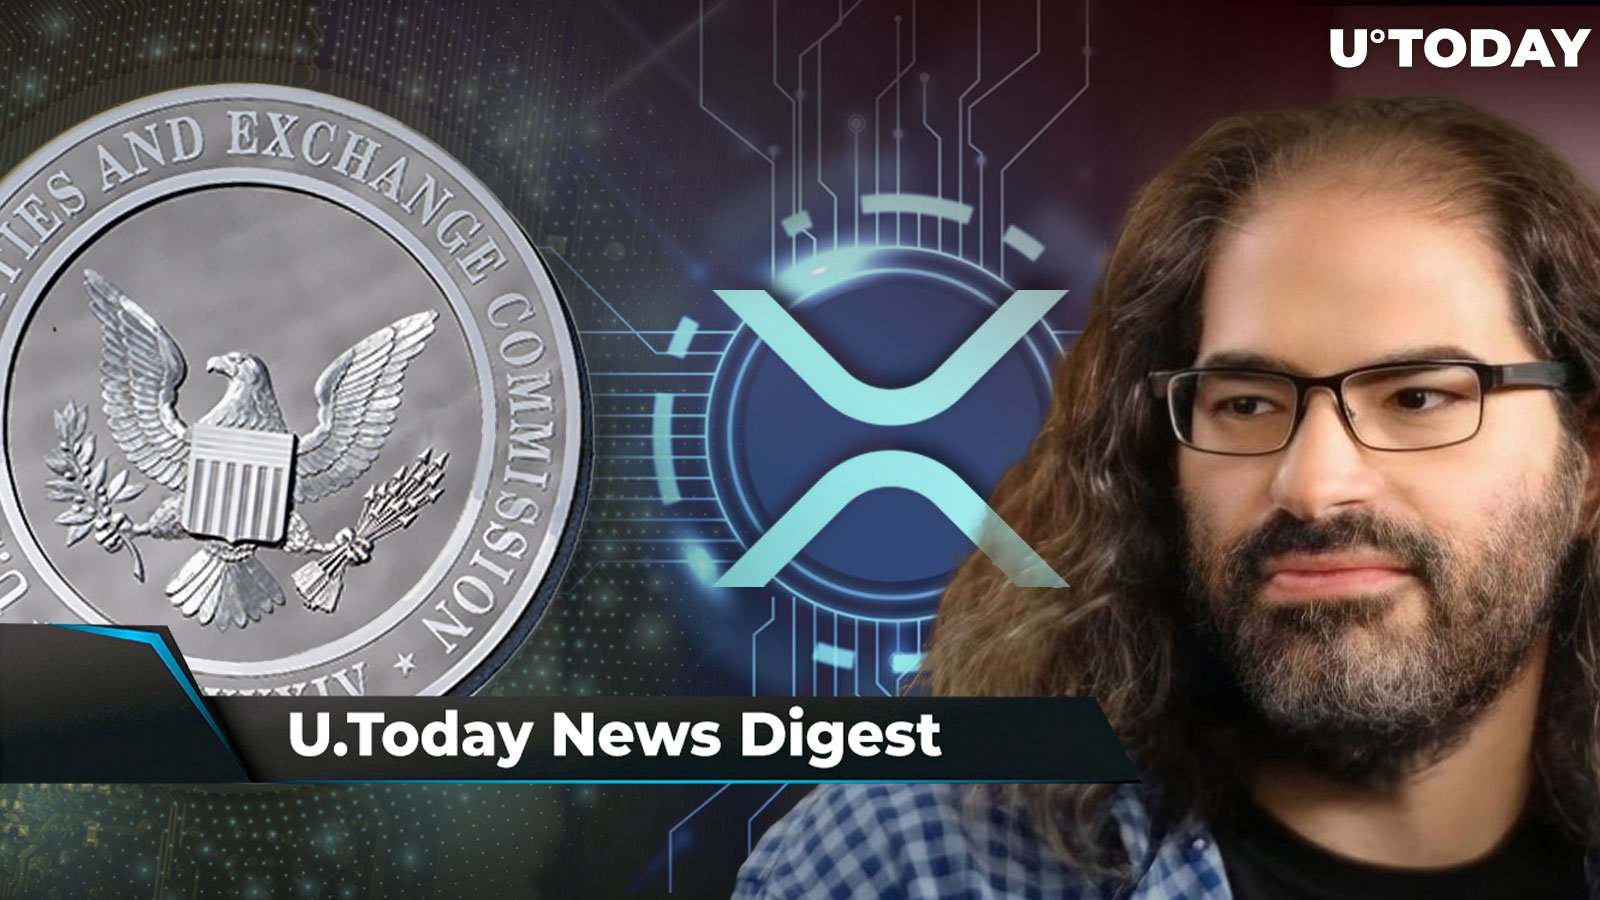 SEC Alleges ADA, SOL and MATIC Are Securities, SHIB 'Calm Before Storm' Updates Revealed, Ripple CTO Provides Insight into XRP Creation: Crypto News Digest by U.Today